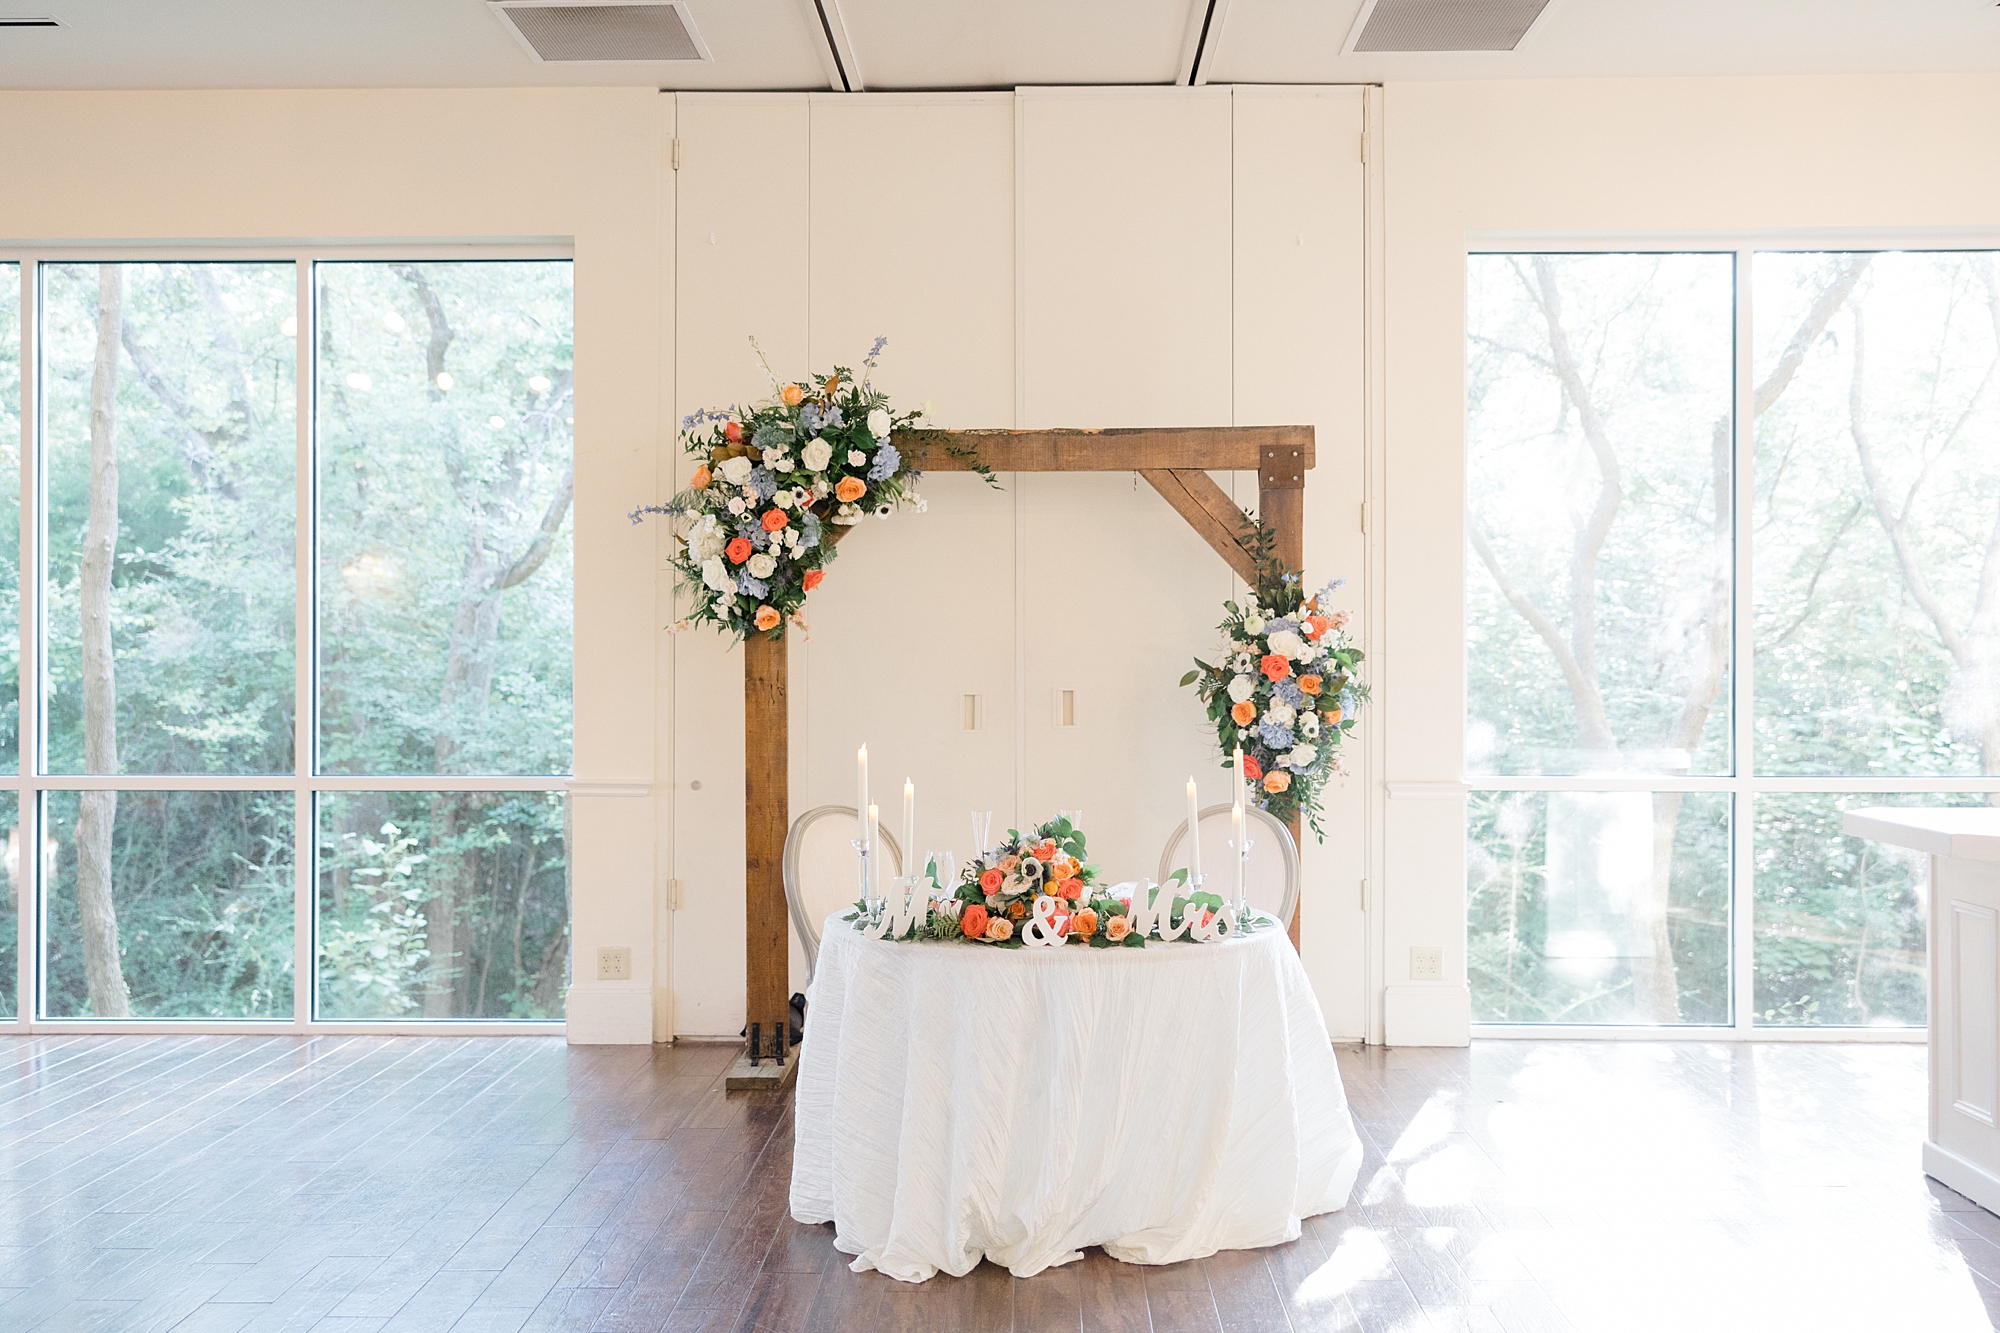 sweetheart table with wooden arbor above it at Ashton Gardens wedding reception 